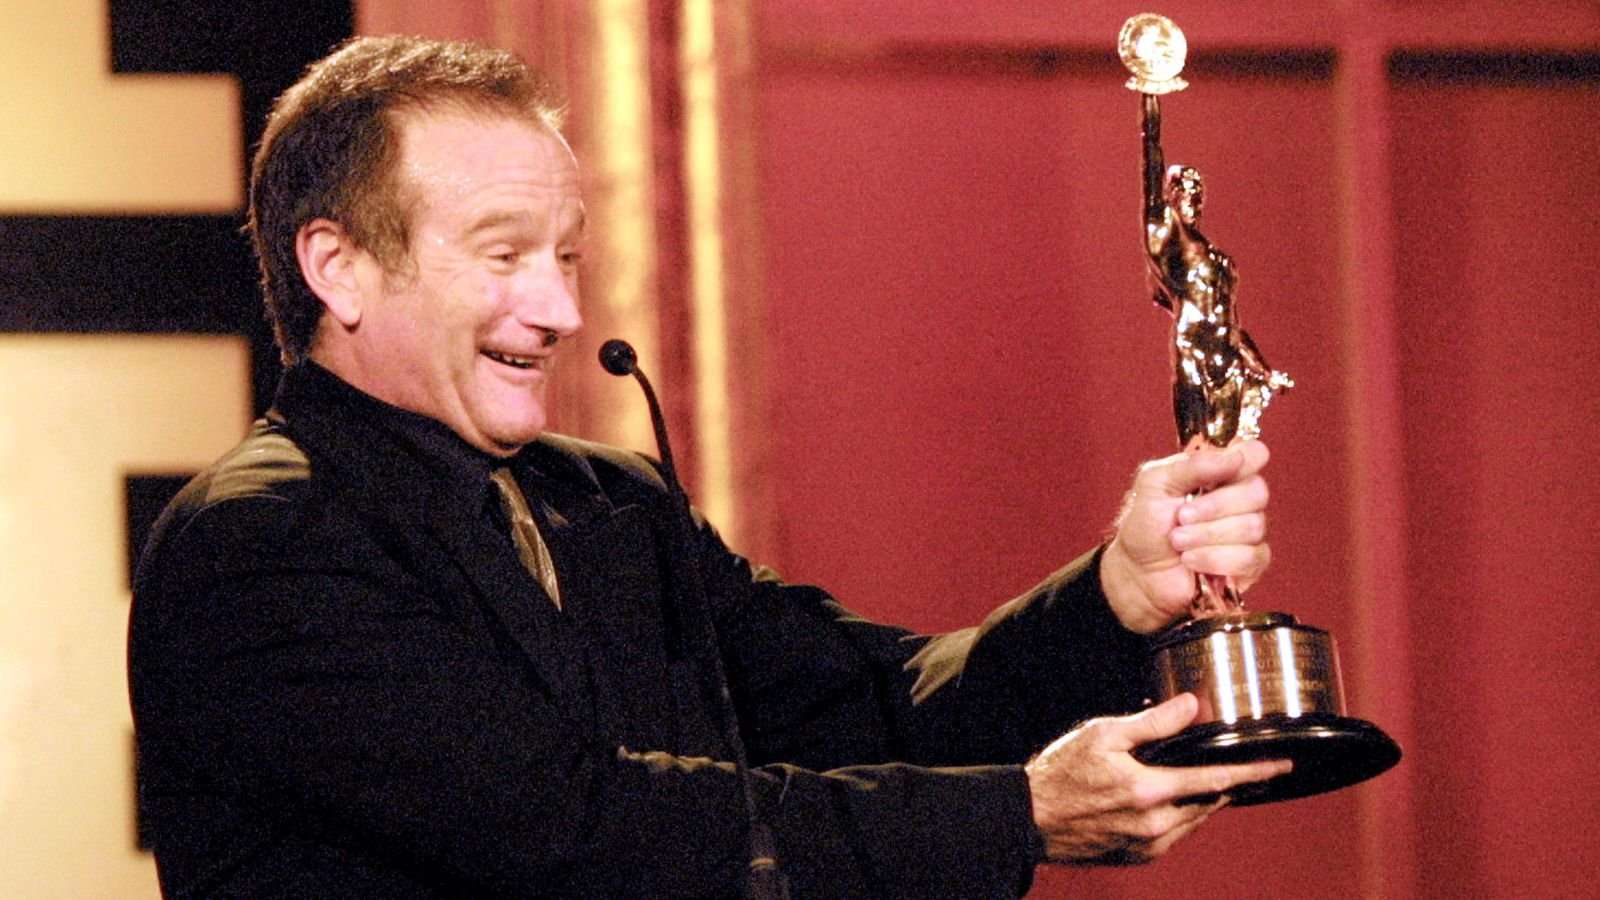 image for Suicides Spiked After Robin Williams' Death: Study